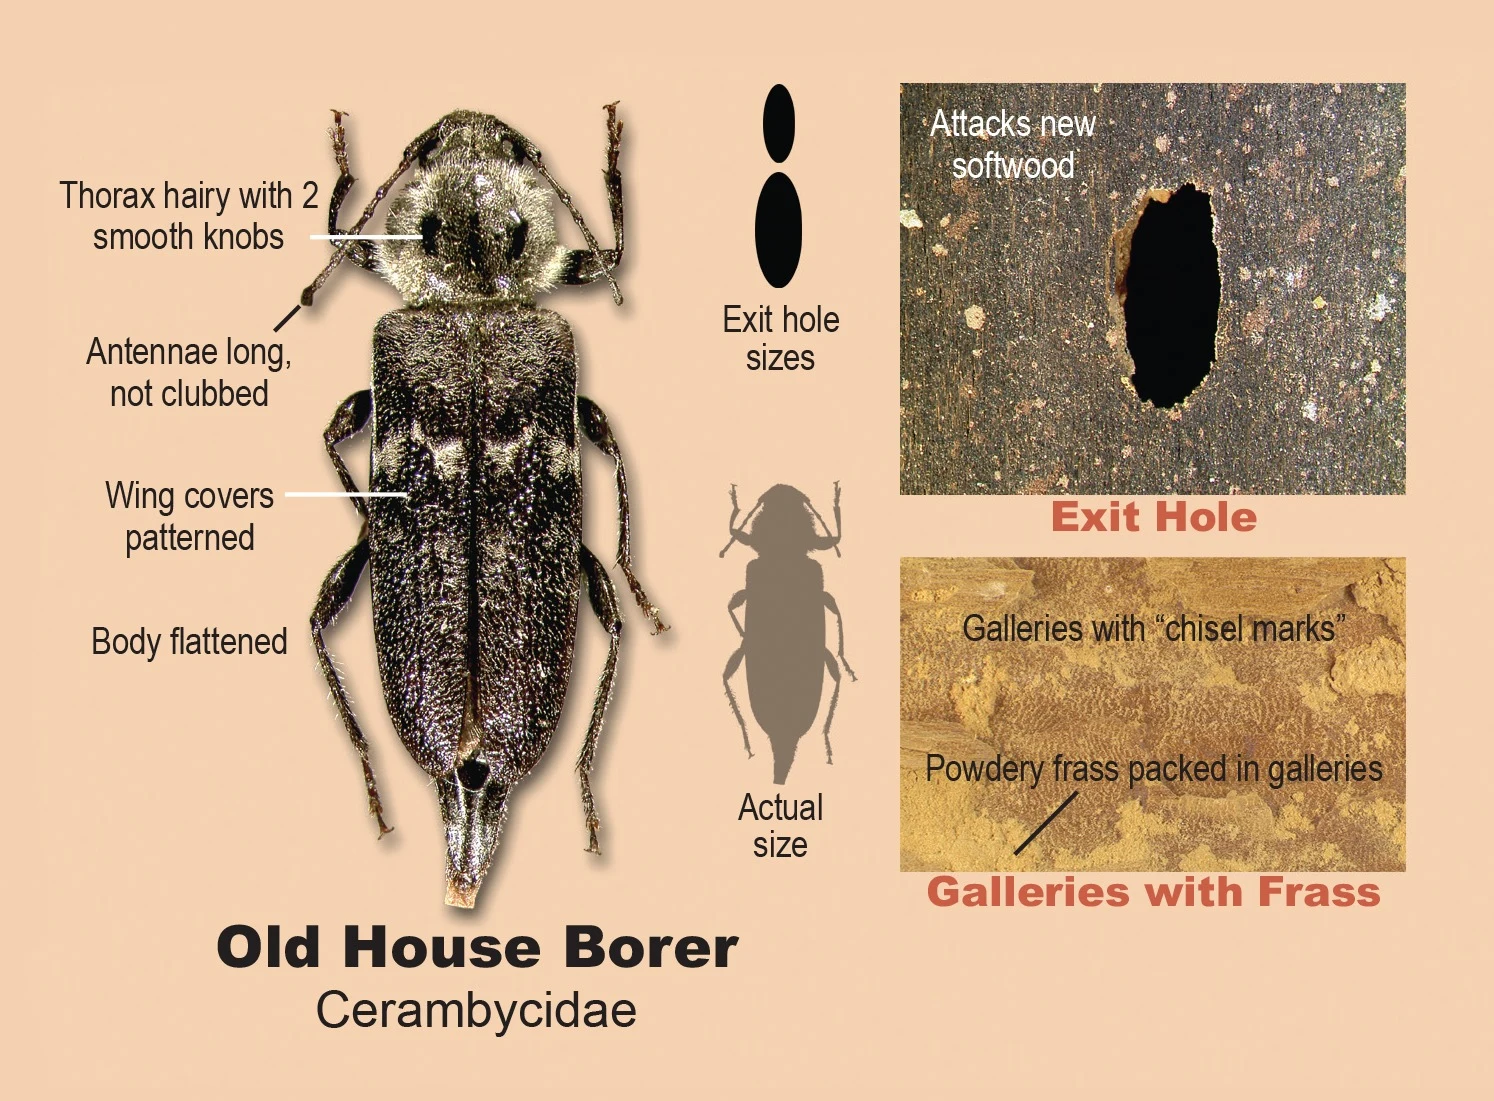 An image of an Old House Borer Beetle (Cerambycidae).